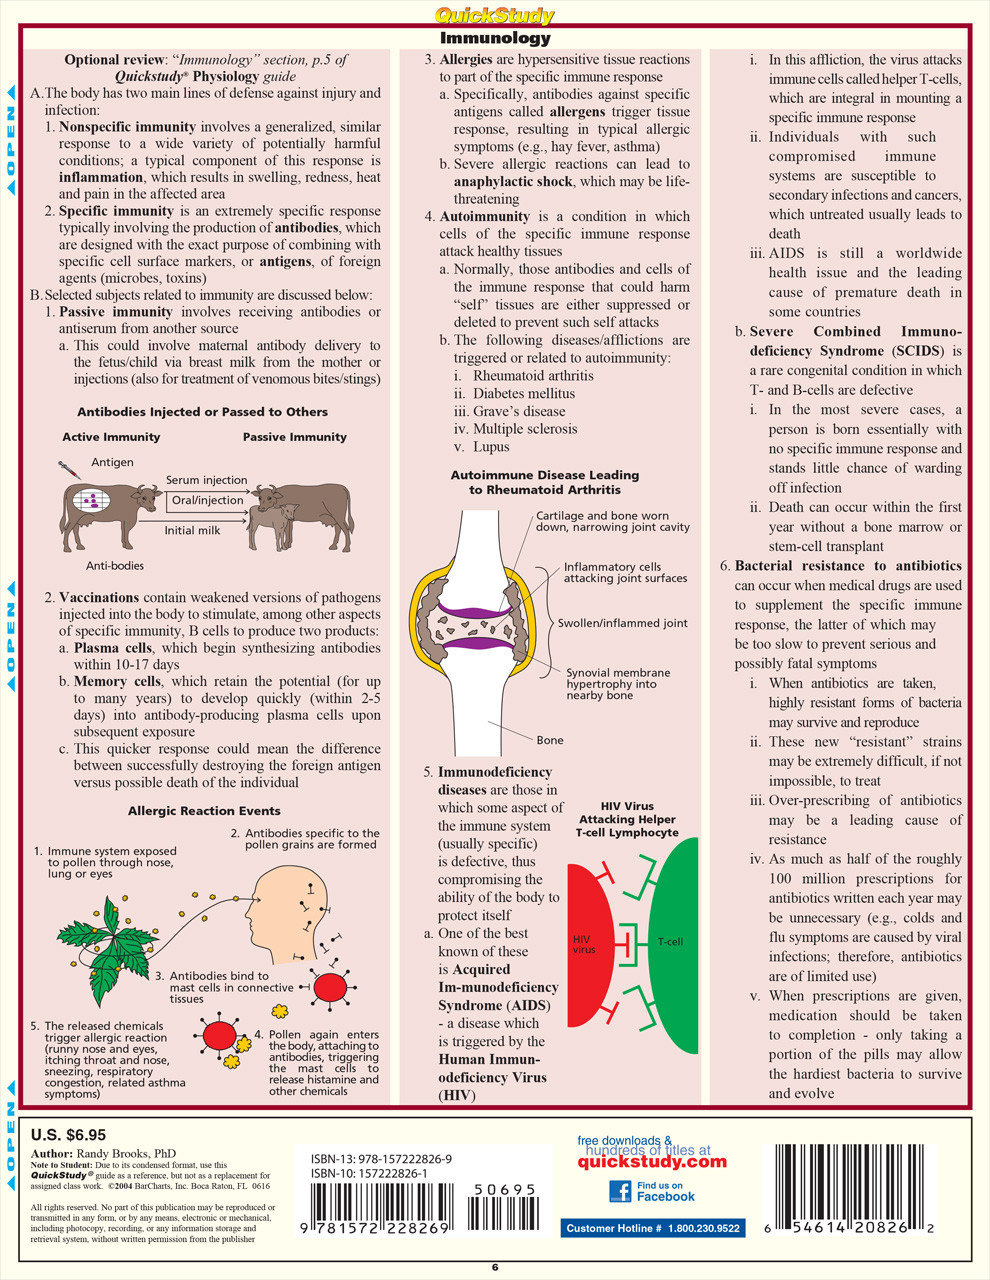 Multicellular Biology Guide - Laminated Biology Quick Reference Guide by  Permacharts: : Industrial & Scientific